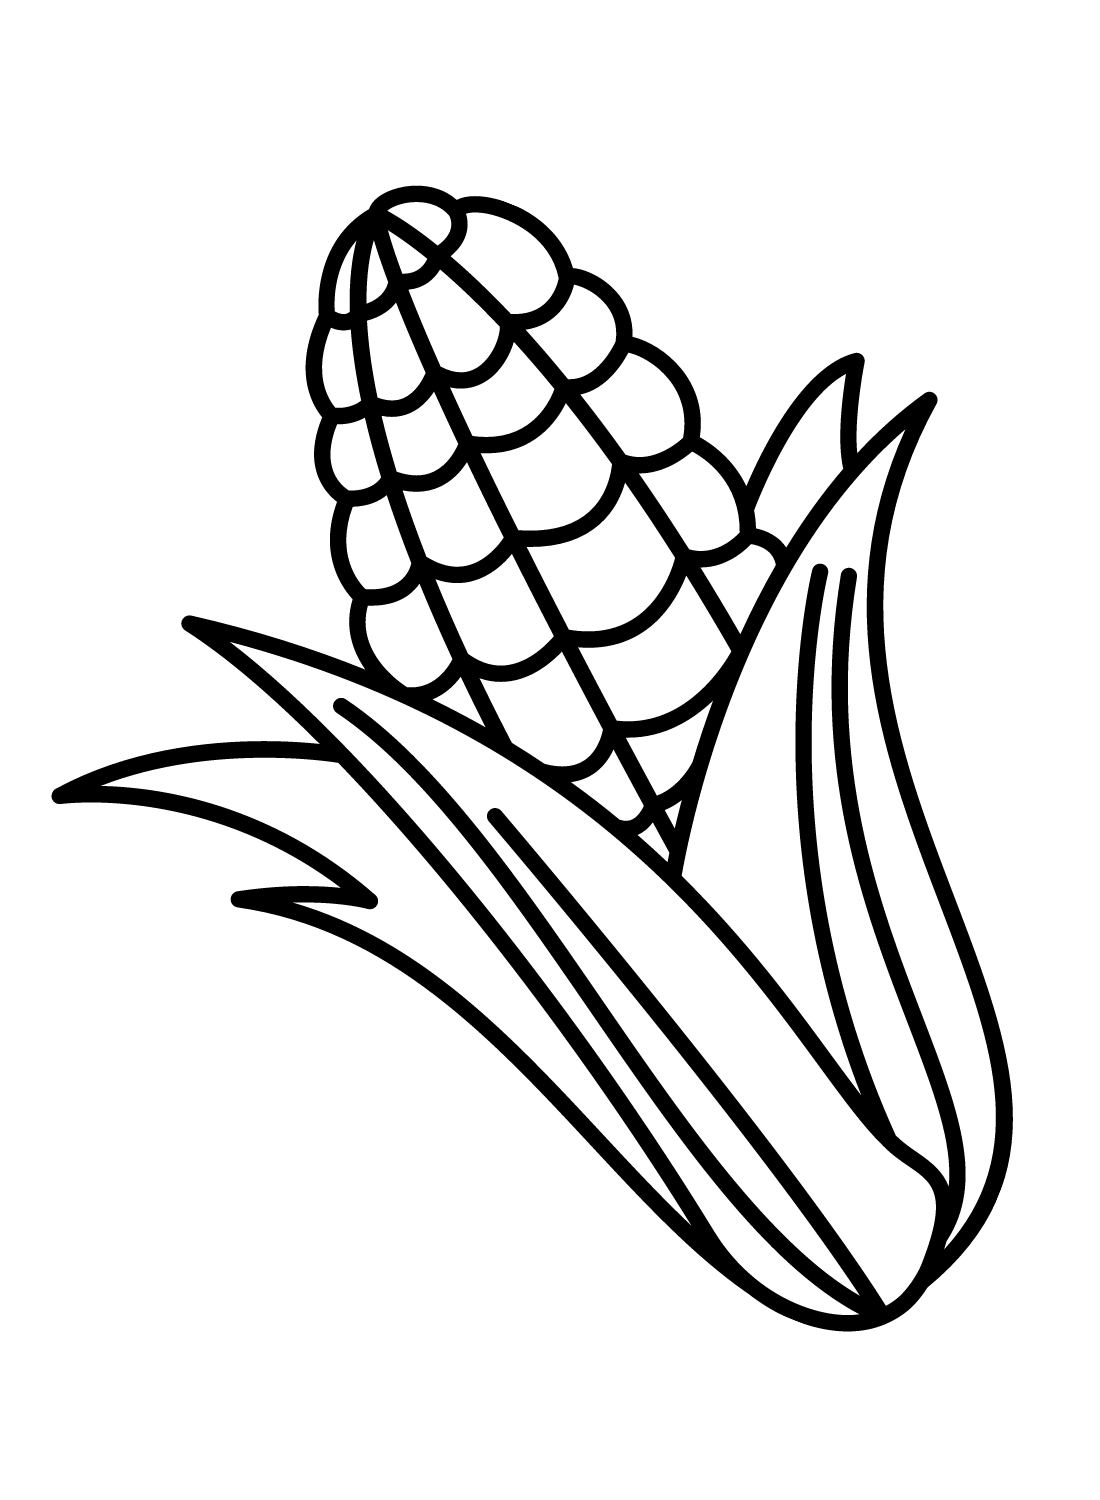 Corn coloring pages printable for free download